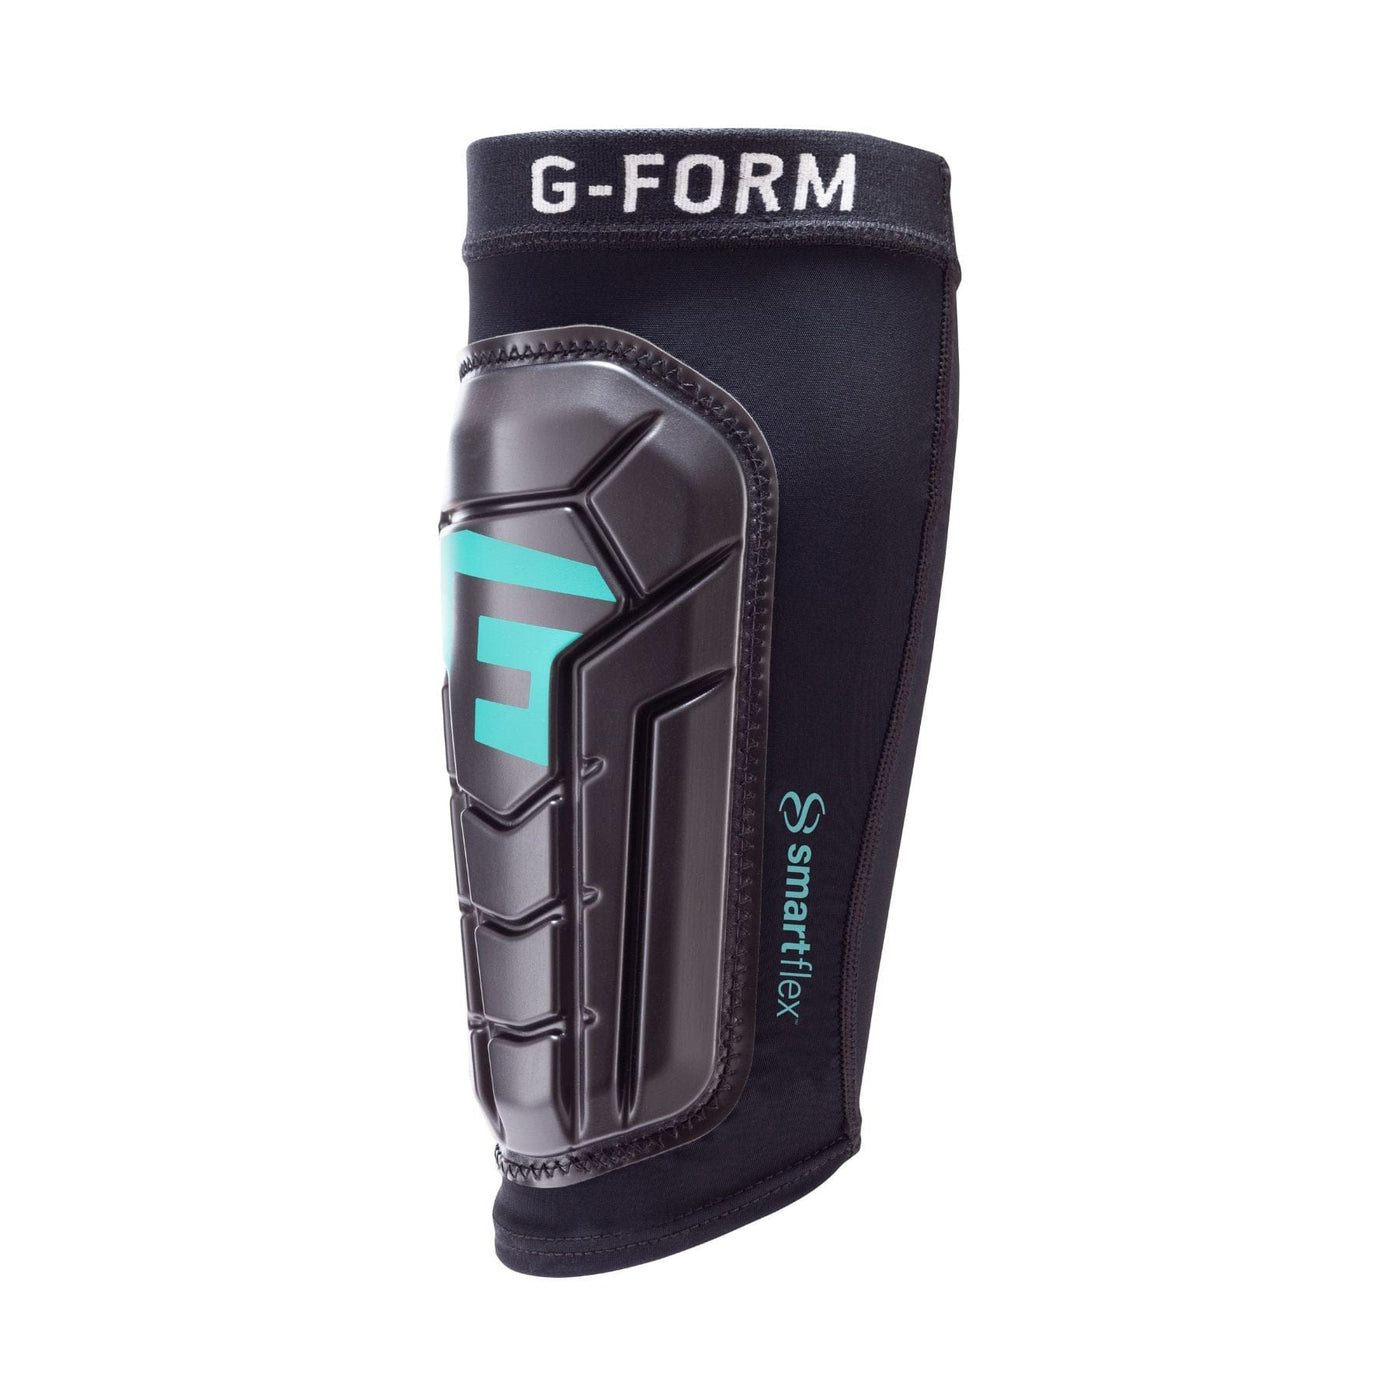 G-Form Shin Guards for Football Pro-S Vento - Mint 8Lines Shop - Fast Shipping